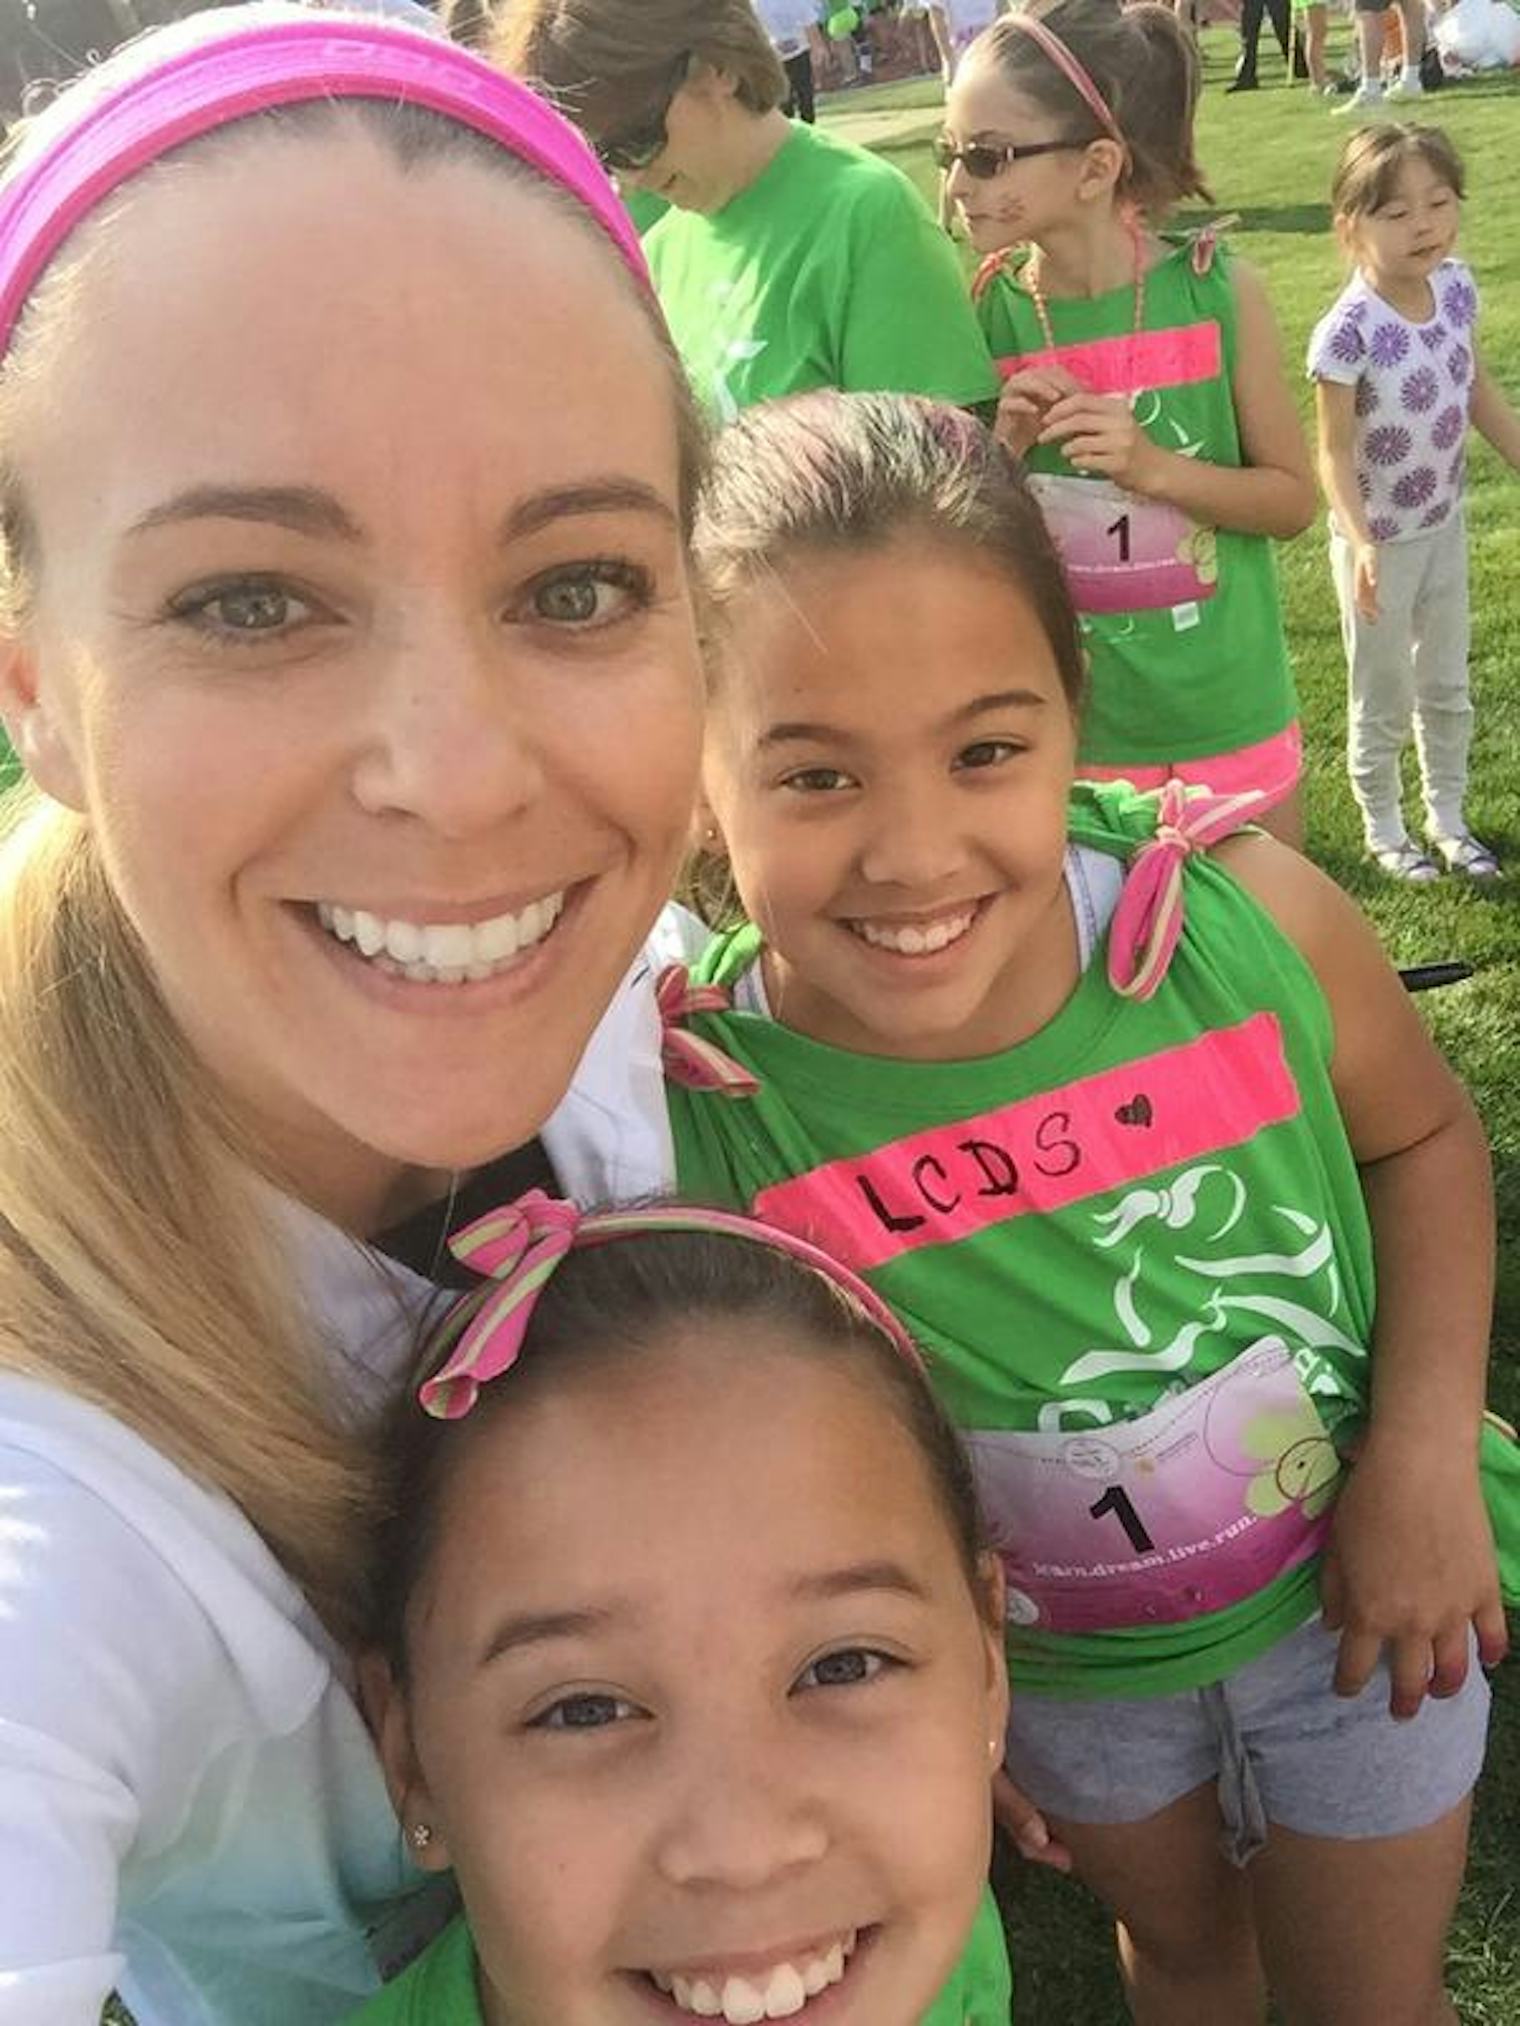 What Do The Gosselin Kids Look Like Now? The 'Kate Plus 8' Stars Have